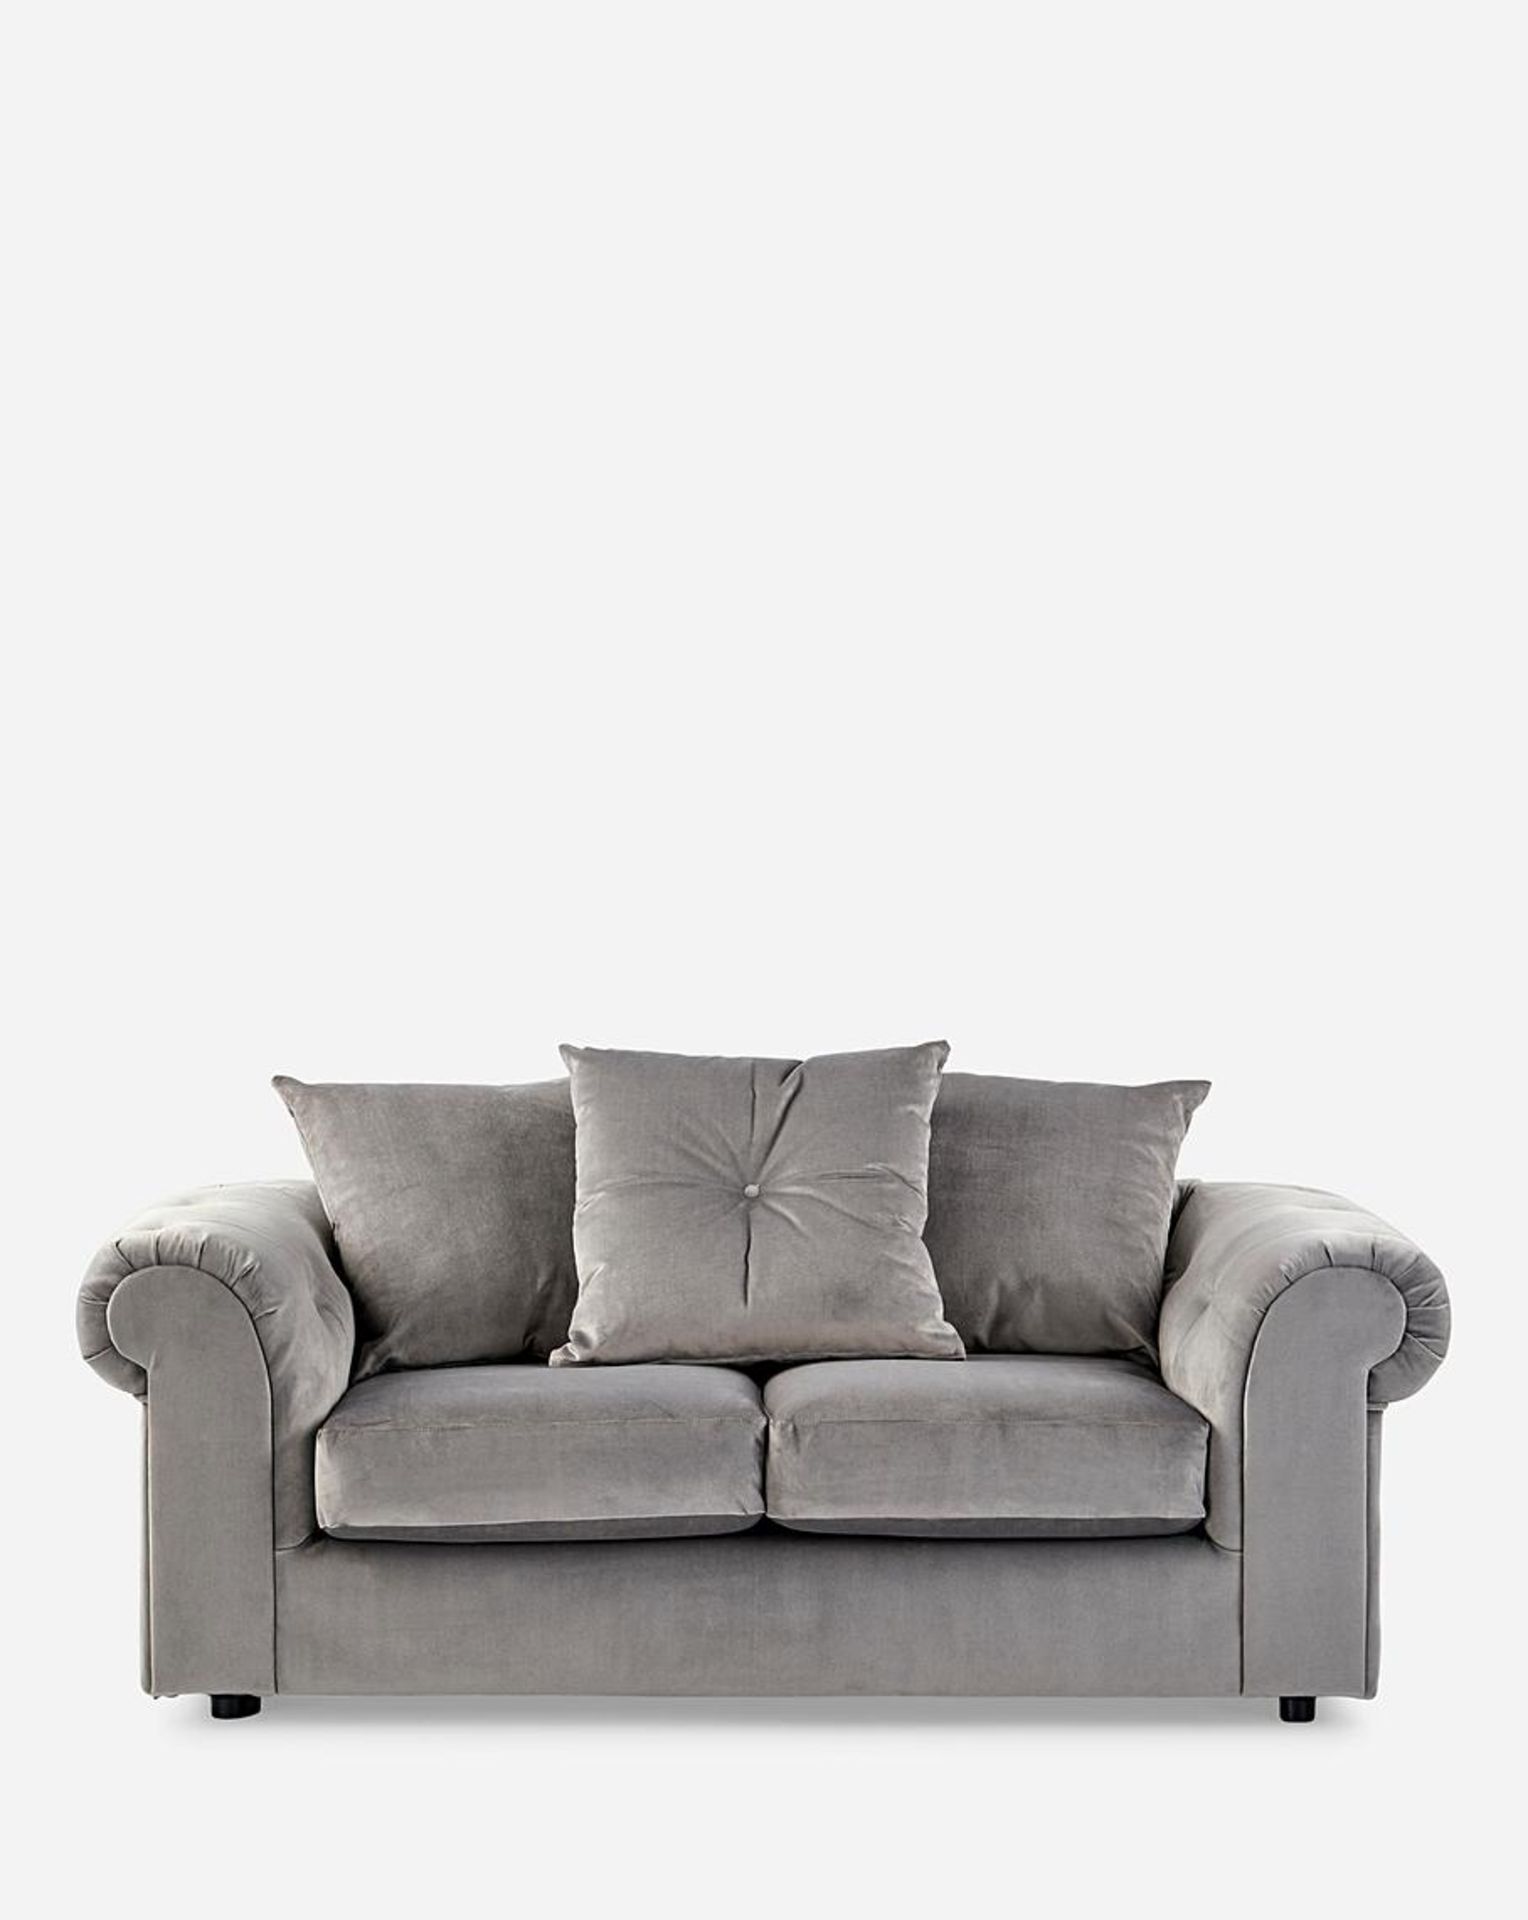 Derby 2 Seater Sofa. RRP £699.00. Discover maximum comfort and luxury with this gorgeous foam-filled